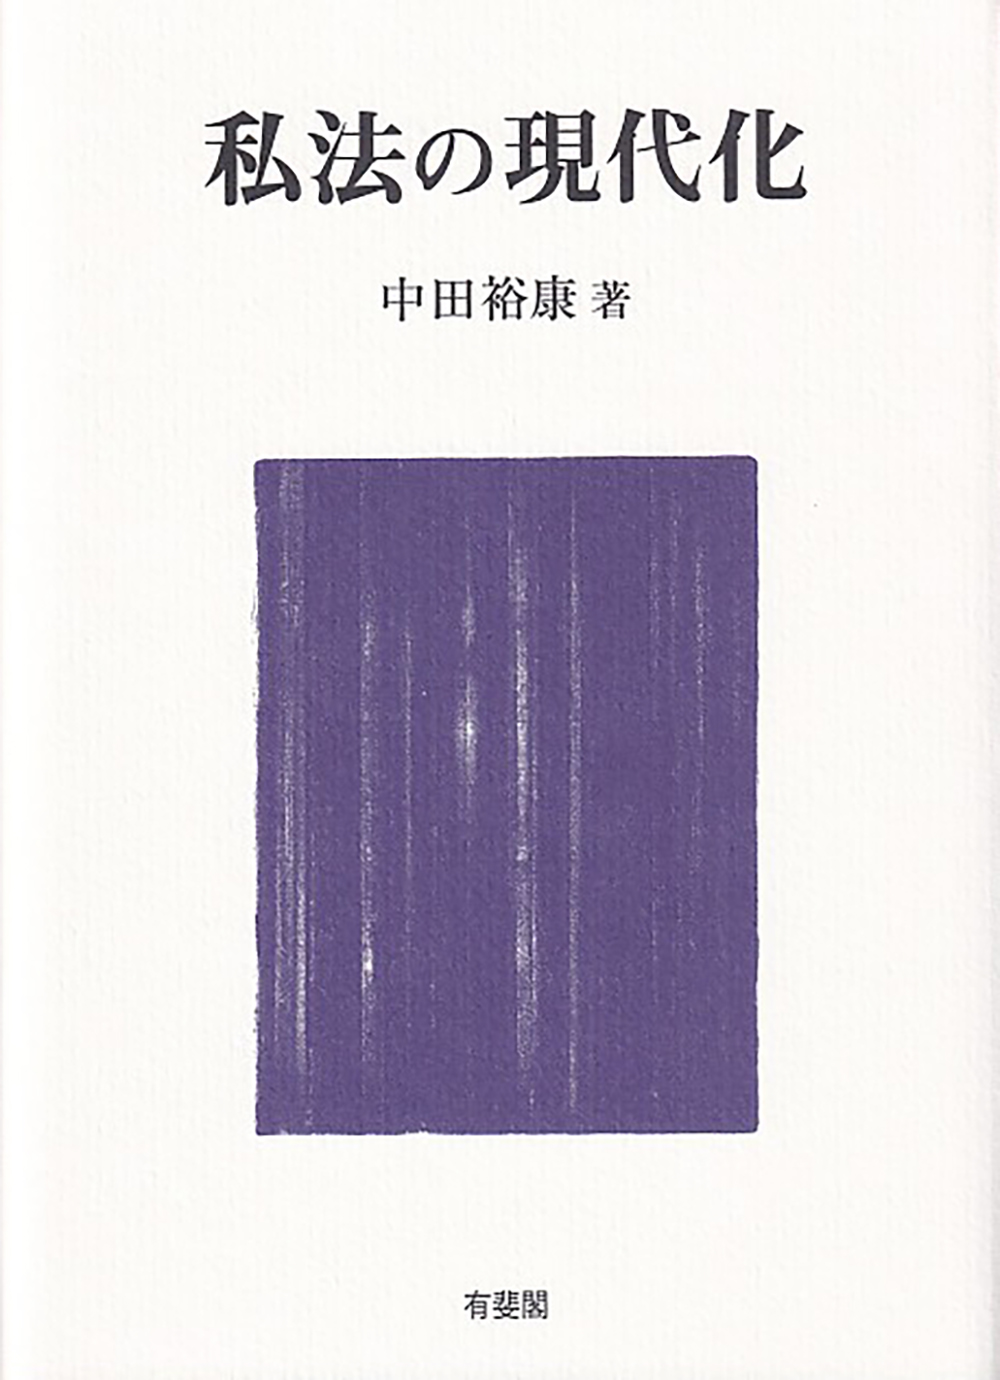 A white cover with purple element